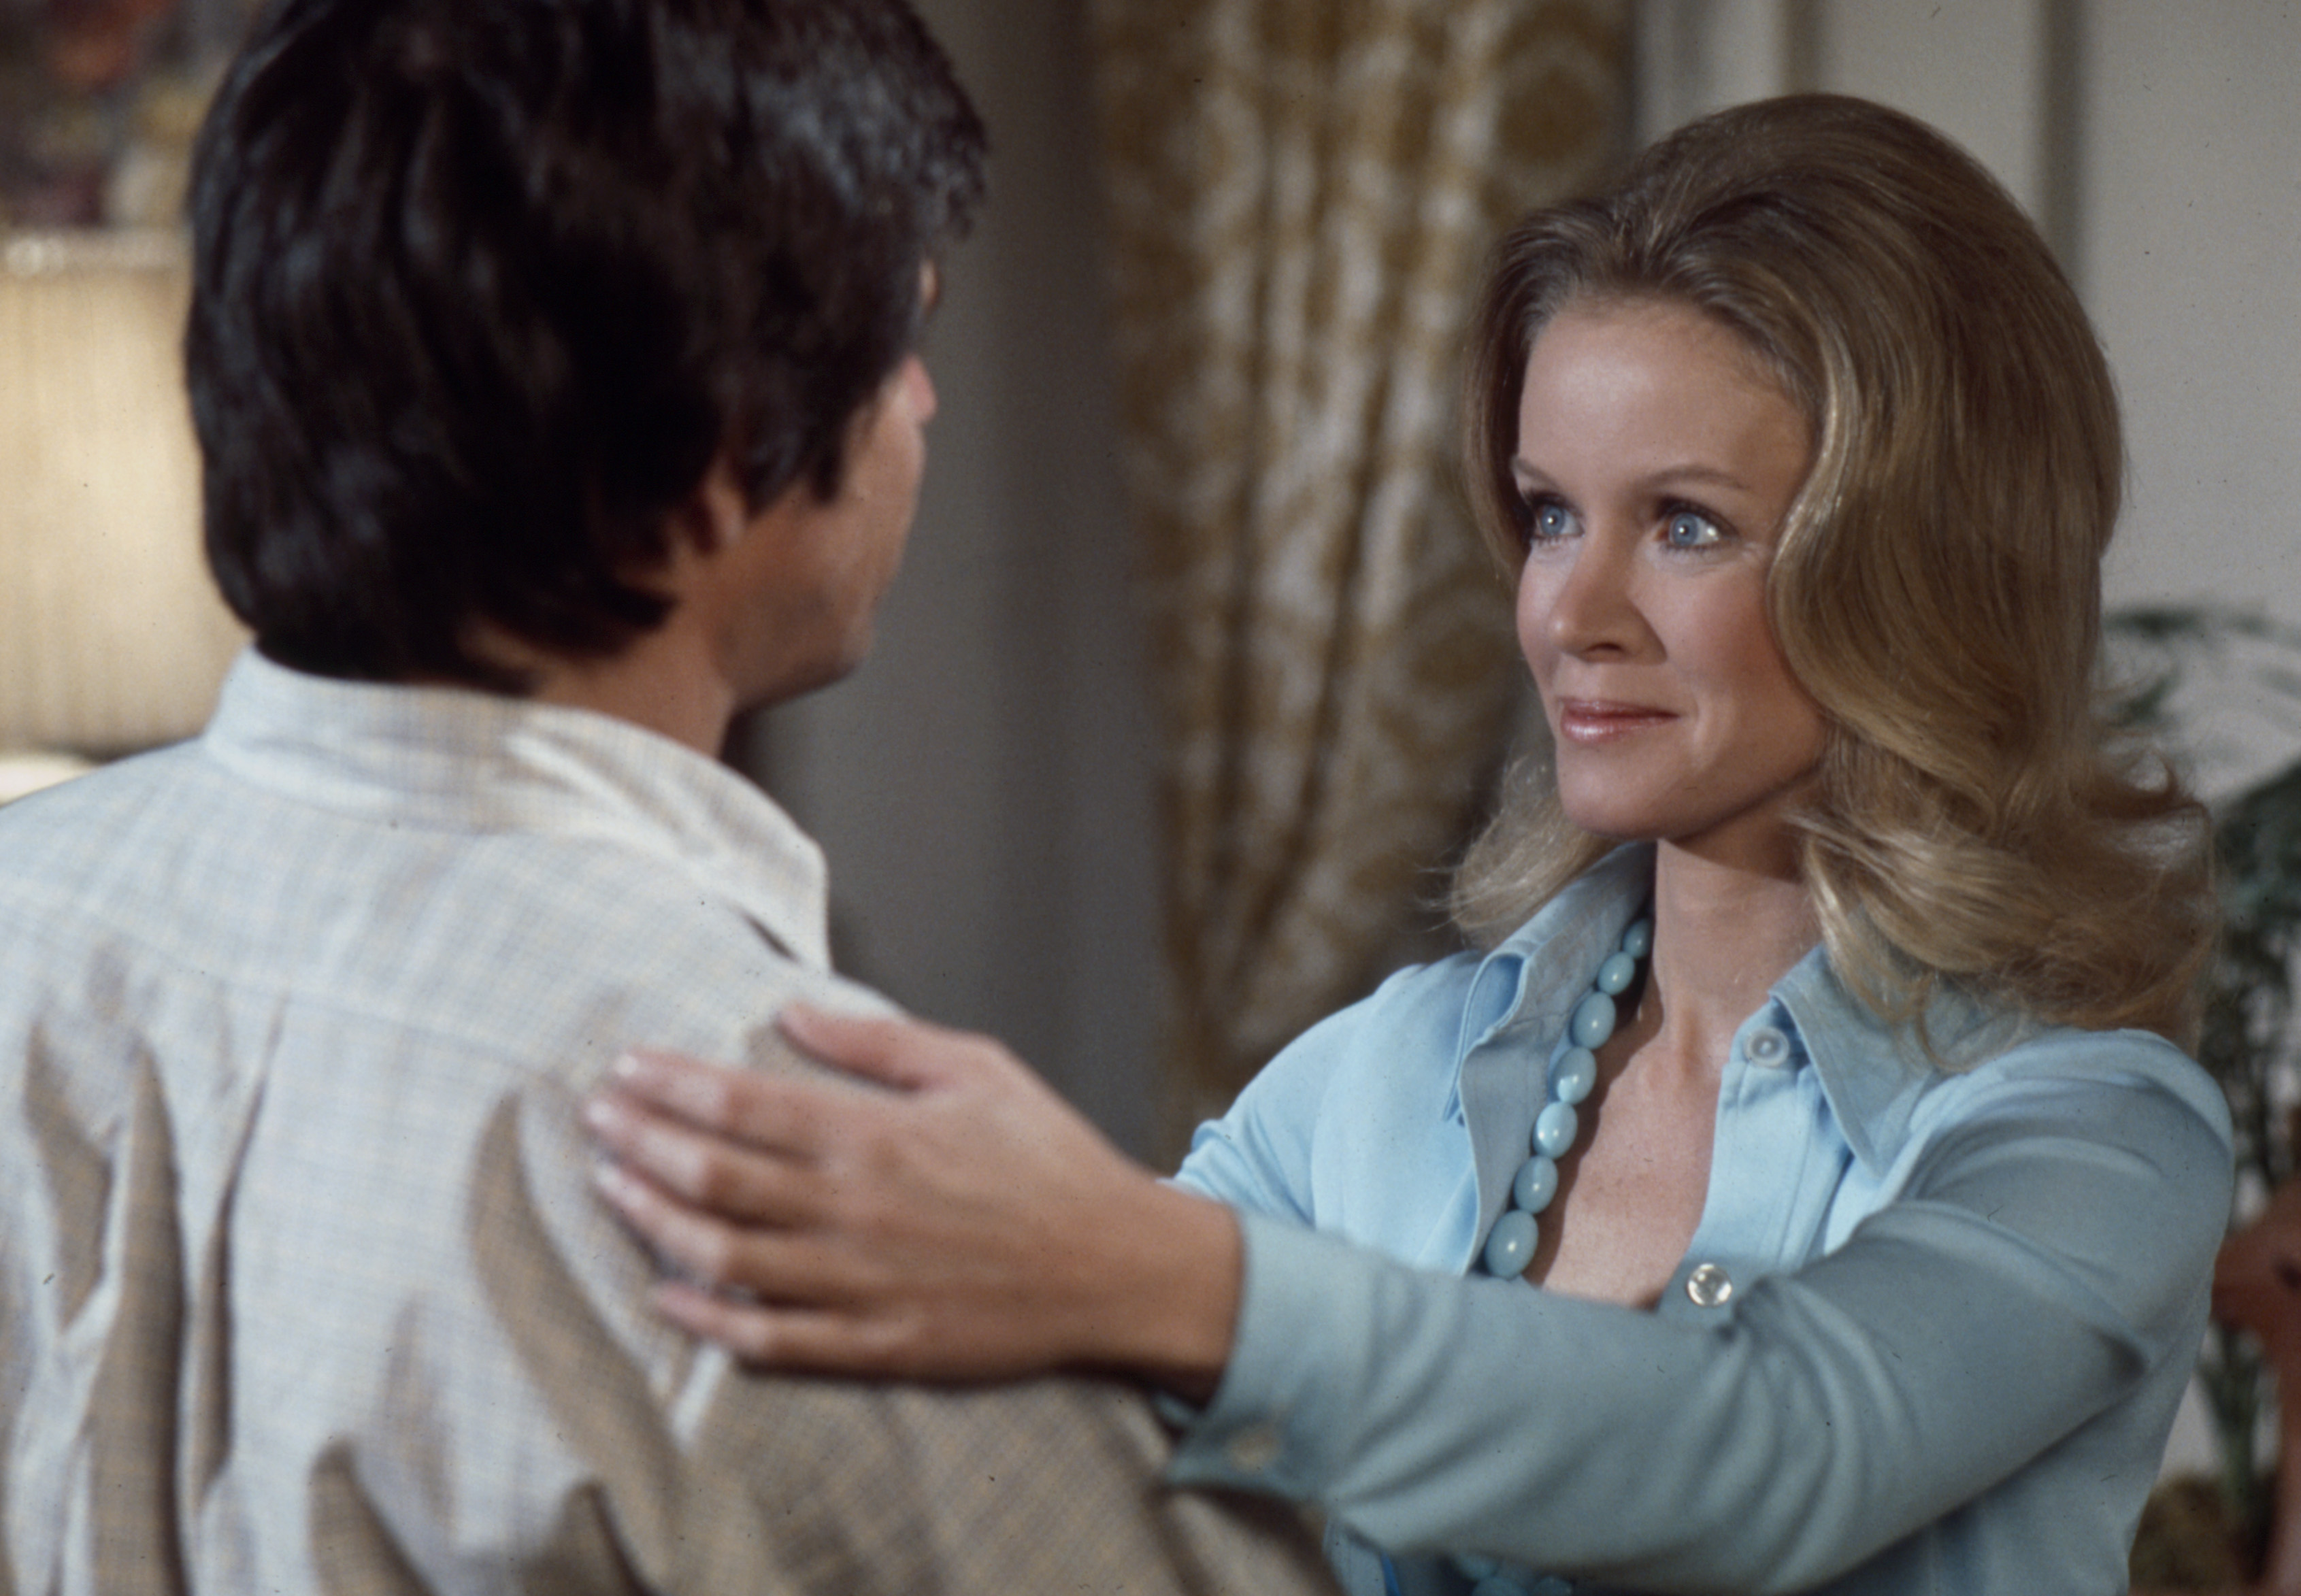 (L-R) William Devane and Donna Mills appearing in the TV movie "The Bait" in 1973. | Source: Getty Images